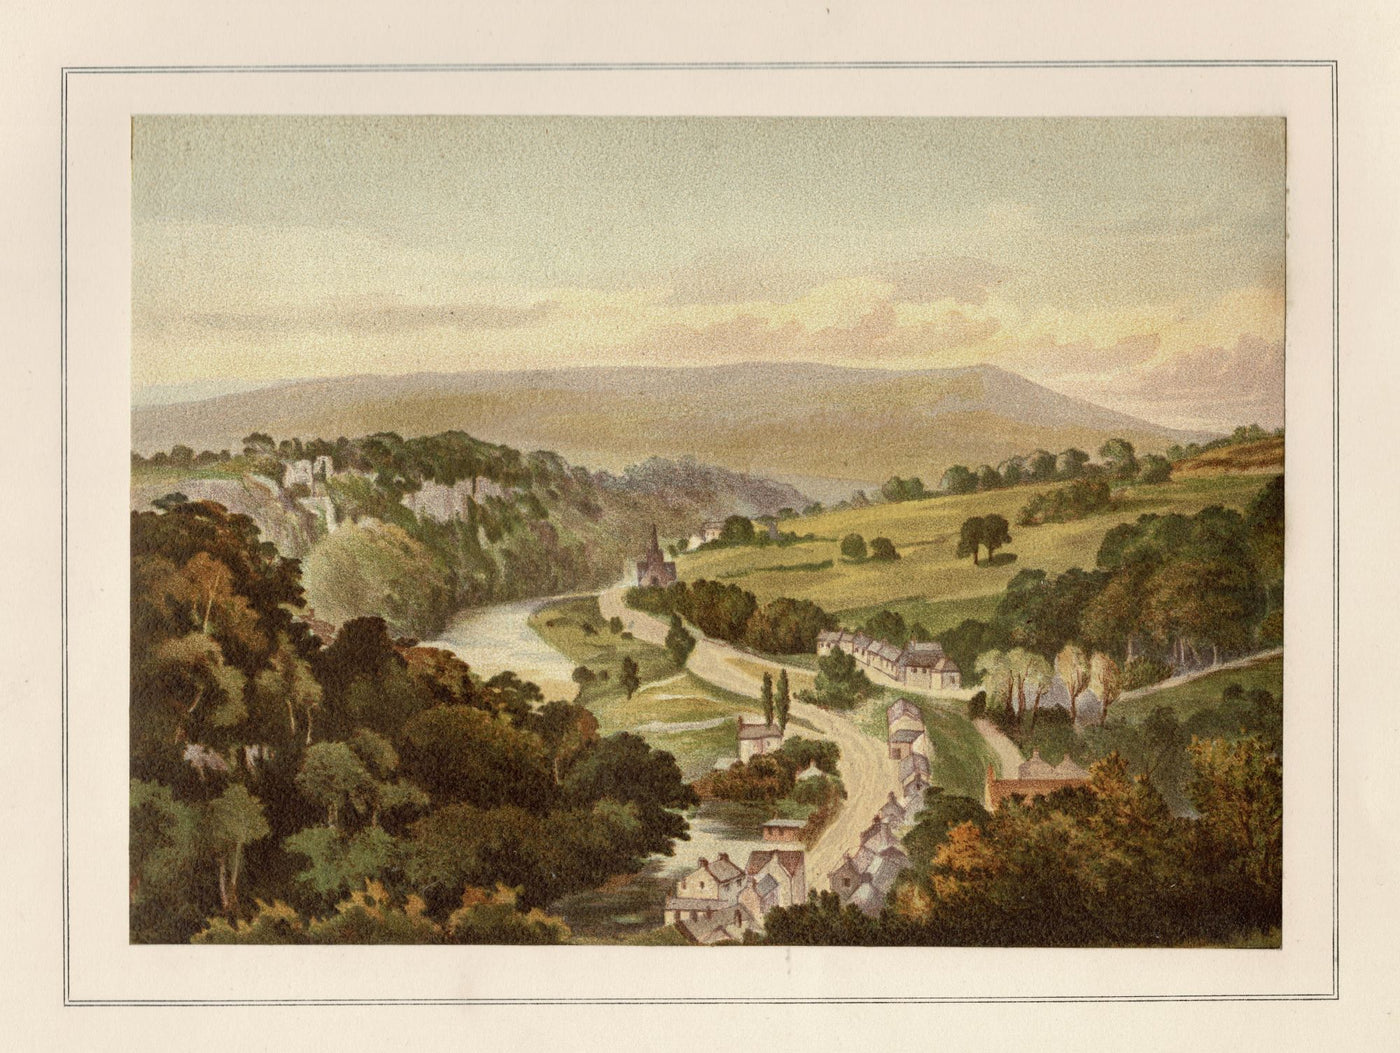 Matlock from the Heights of Abraham antique print 1879